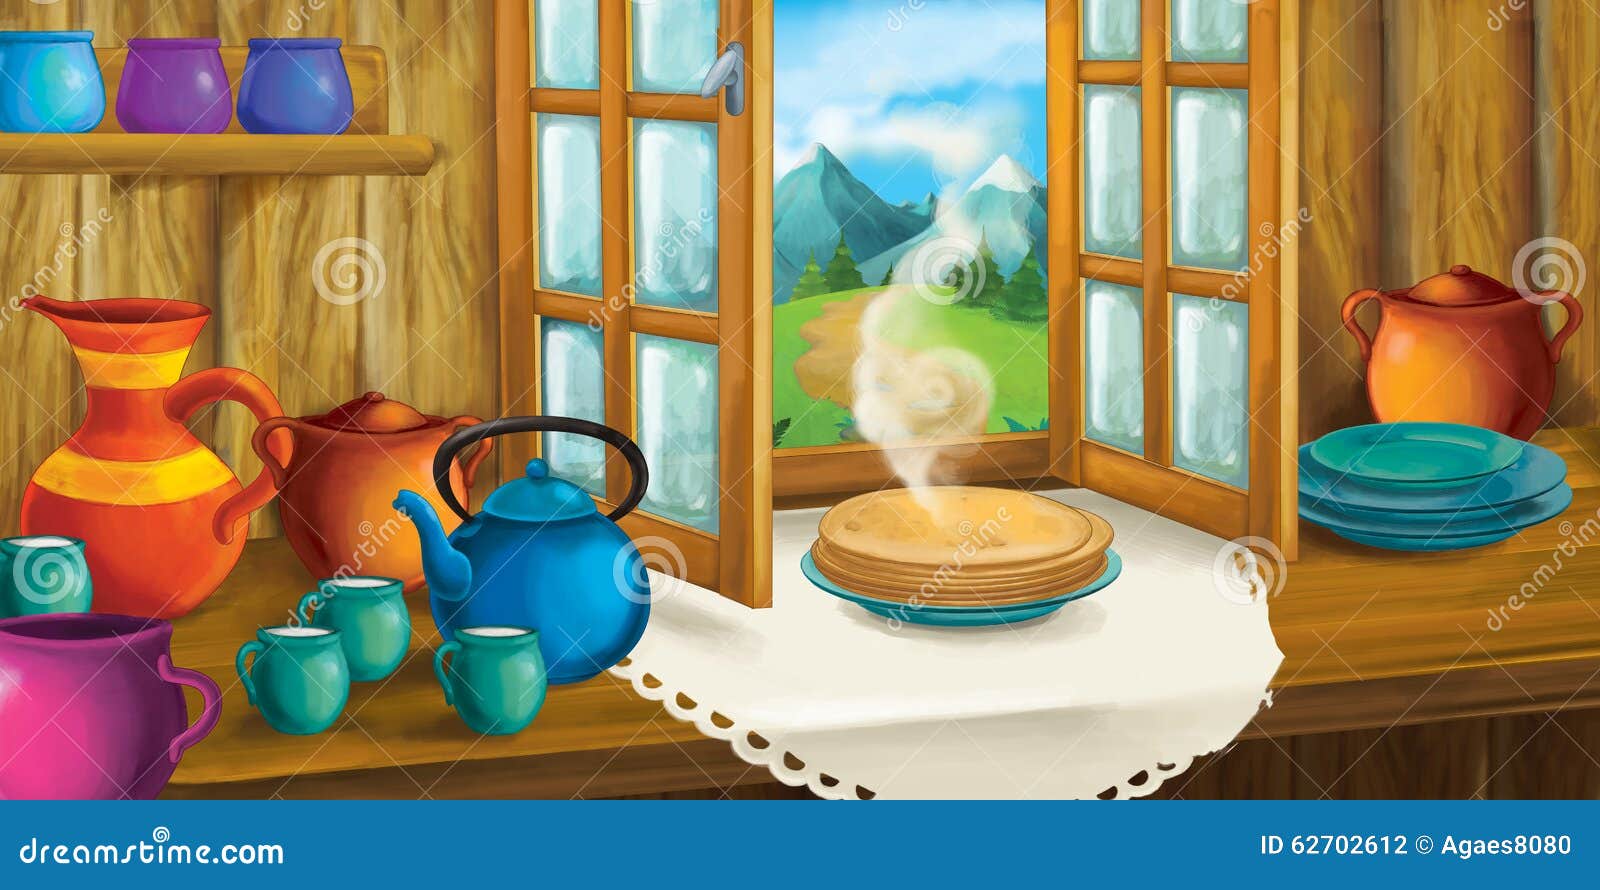 Cartoon Background for Fairy Tale - Interior of Old Fashioned House -  Kitchen Stock Illustration - Illustration of children, farm: 62702612